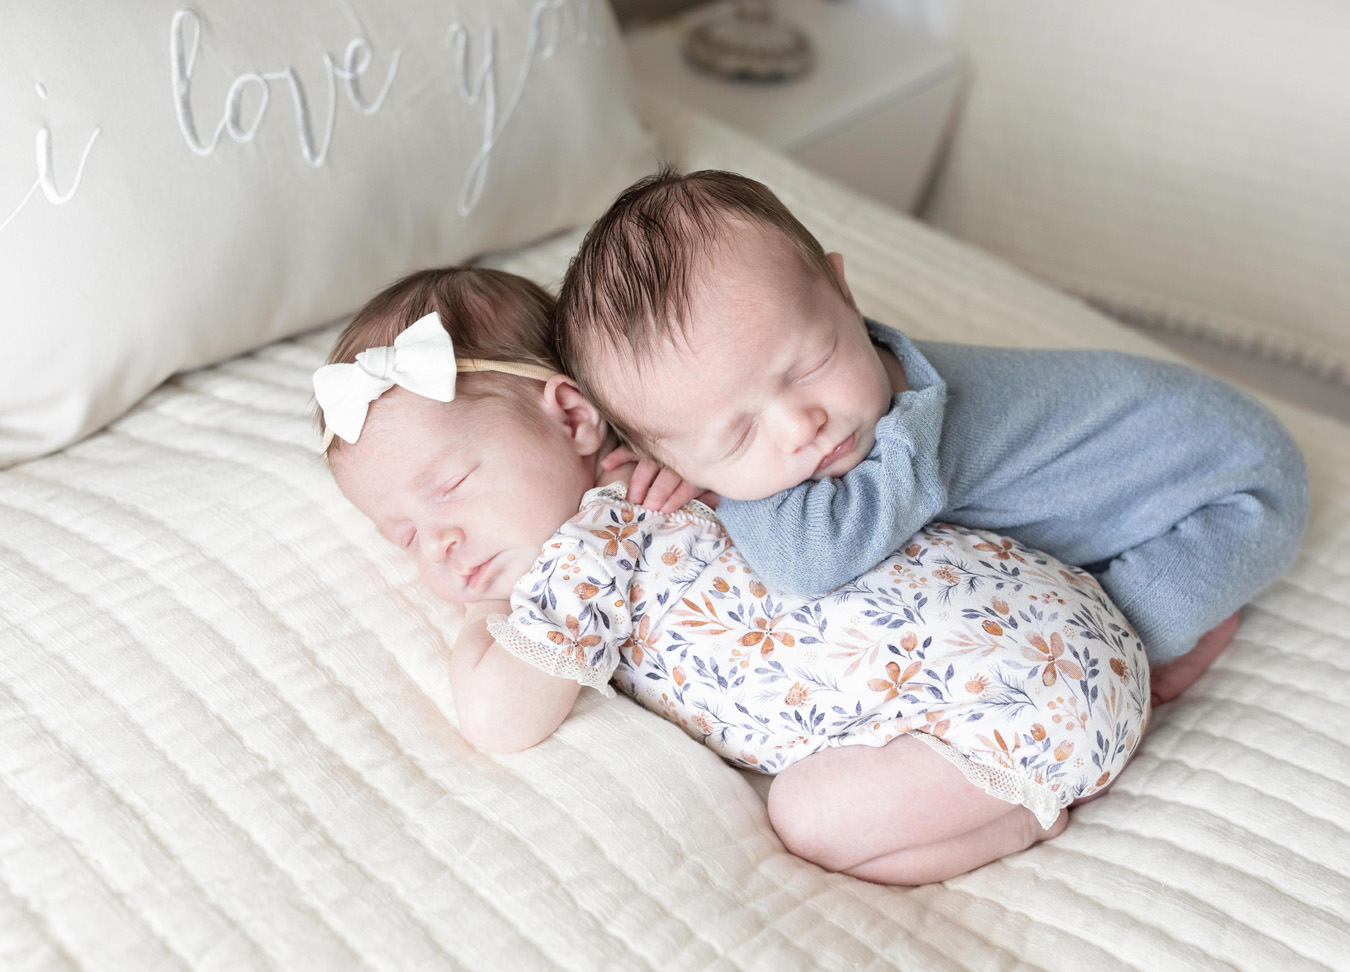 twin newborn session with one twin laying on the bed in a floral outfit and the second twin leaning on top of the first twin in a blue outfit.